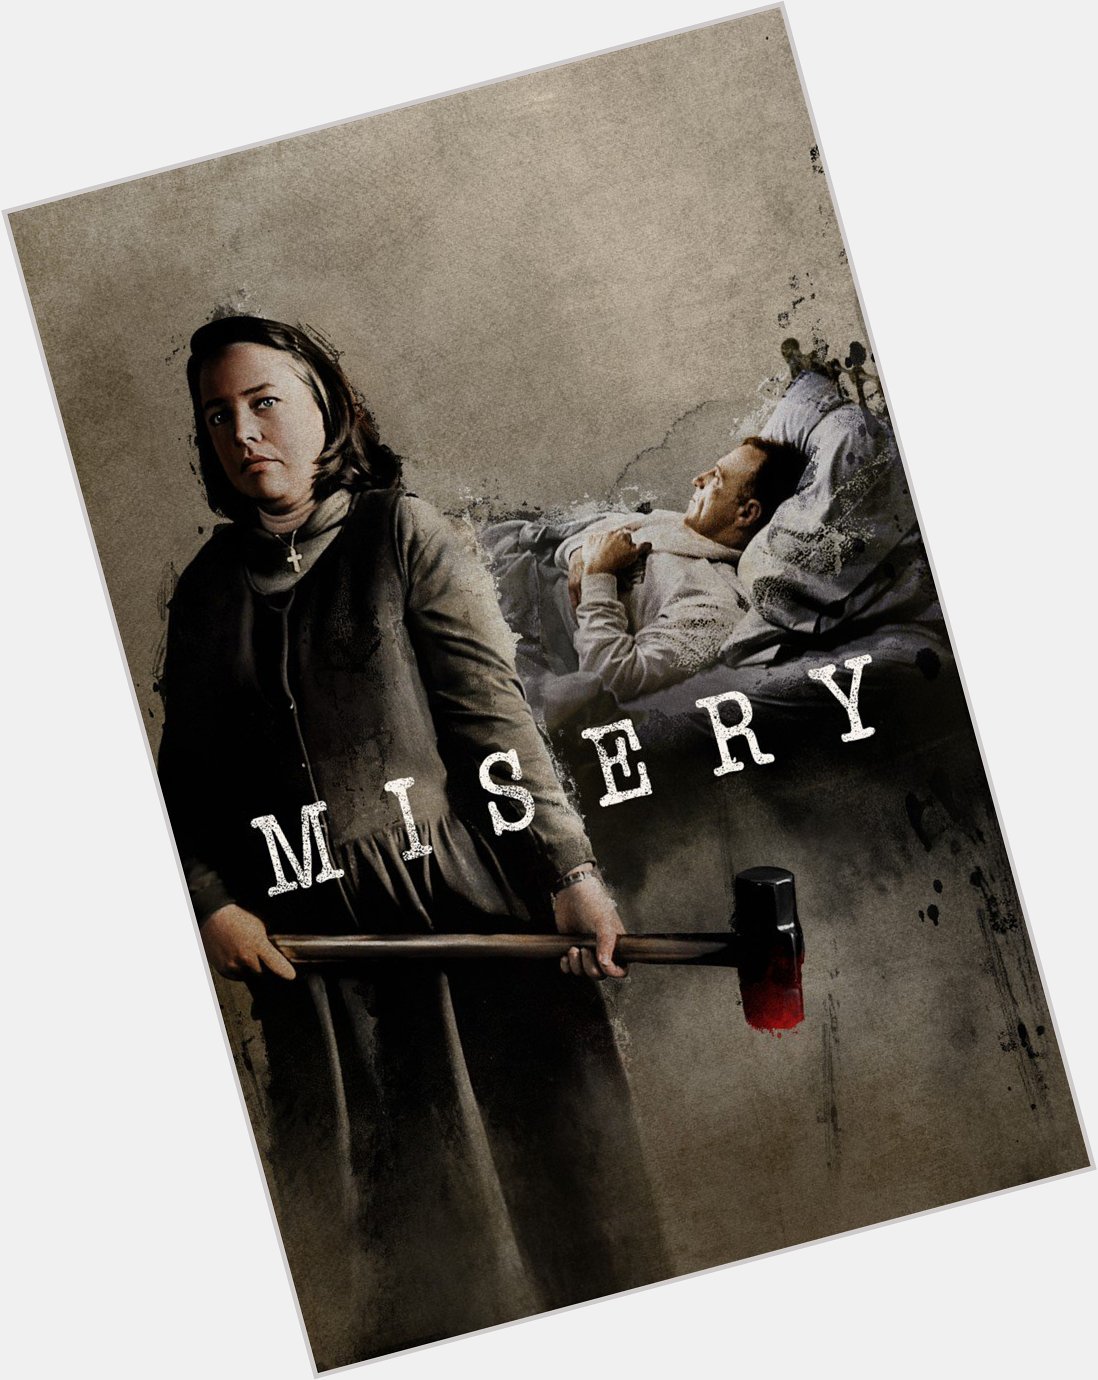 Happy Birthday to the director of Misery (1990) Mr. Rob Reiner 